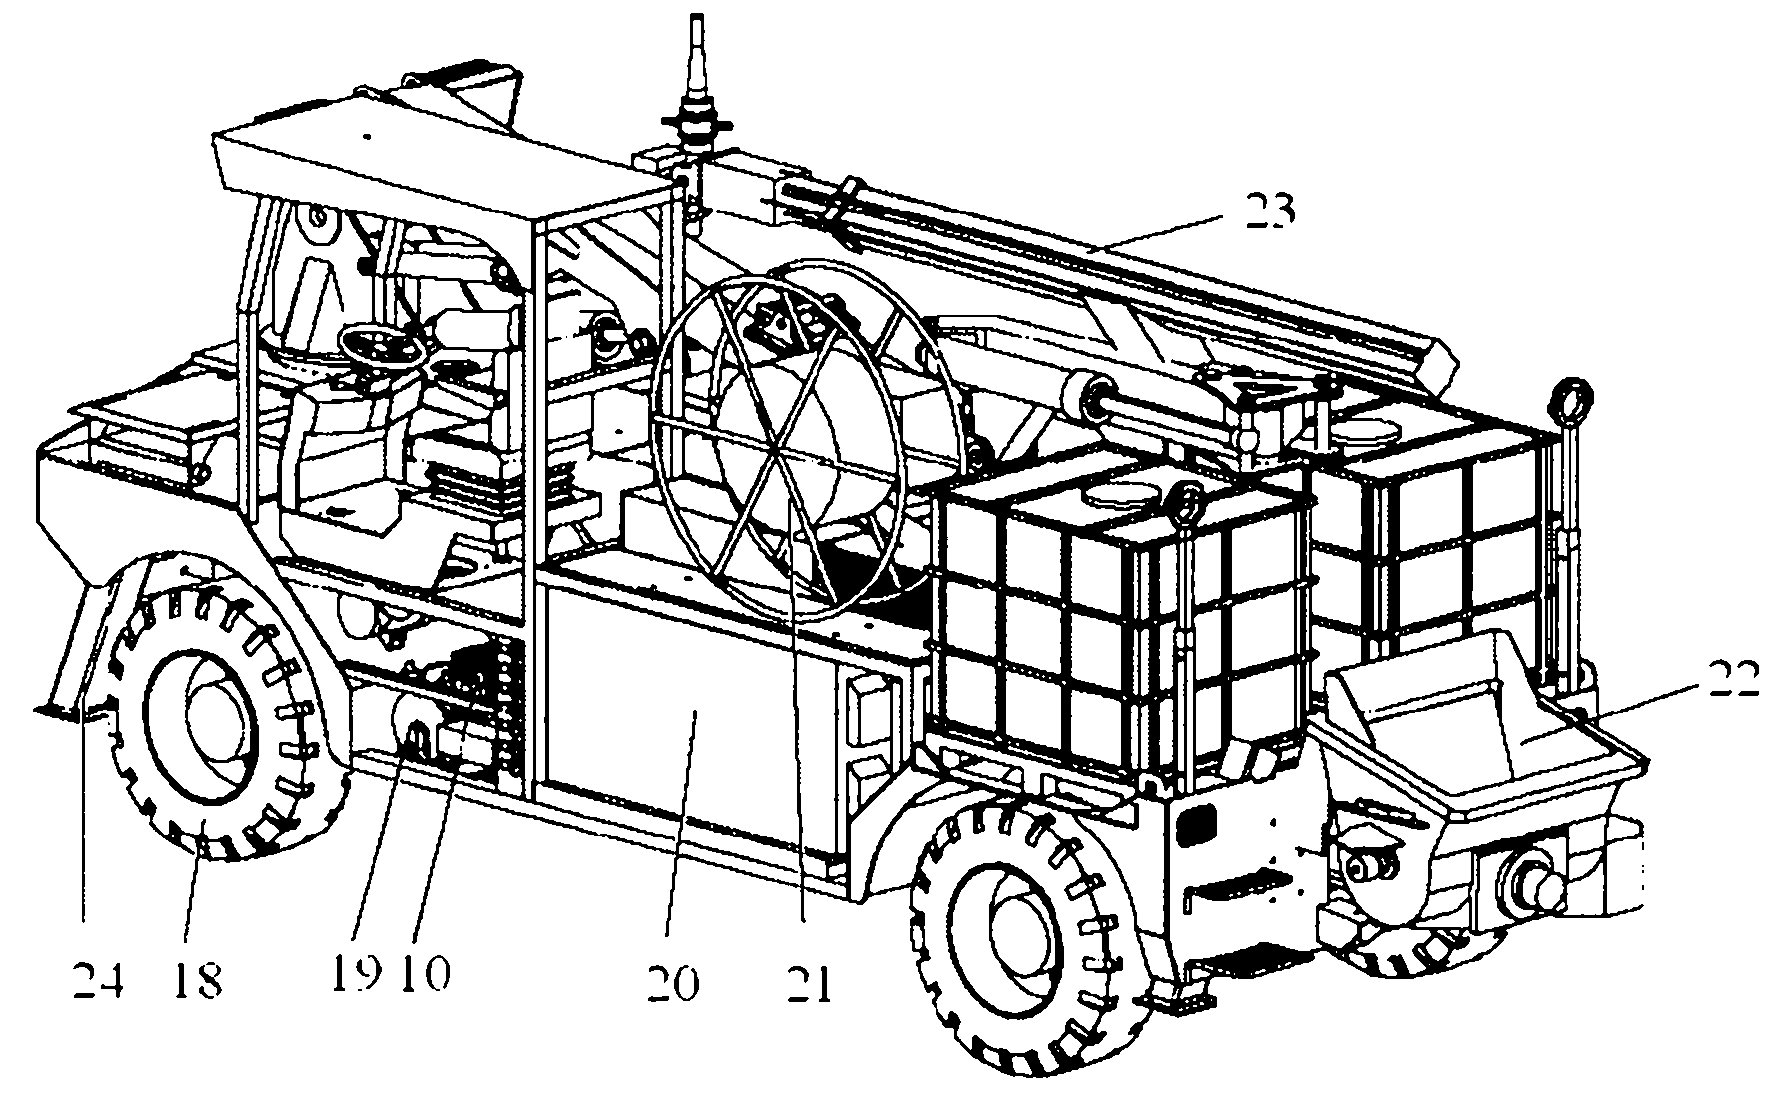 Control system and self-travelling type construction machinery with same